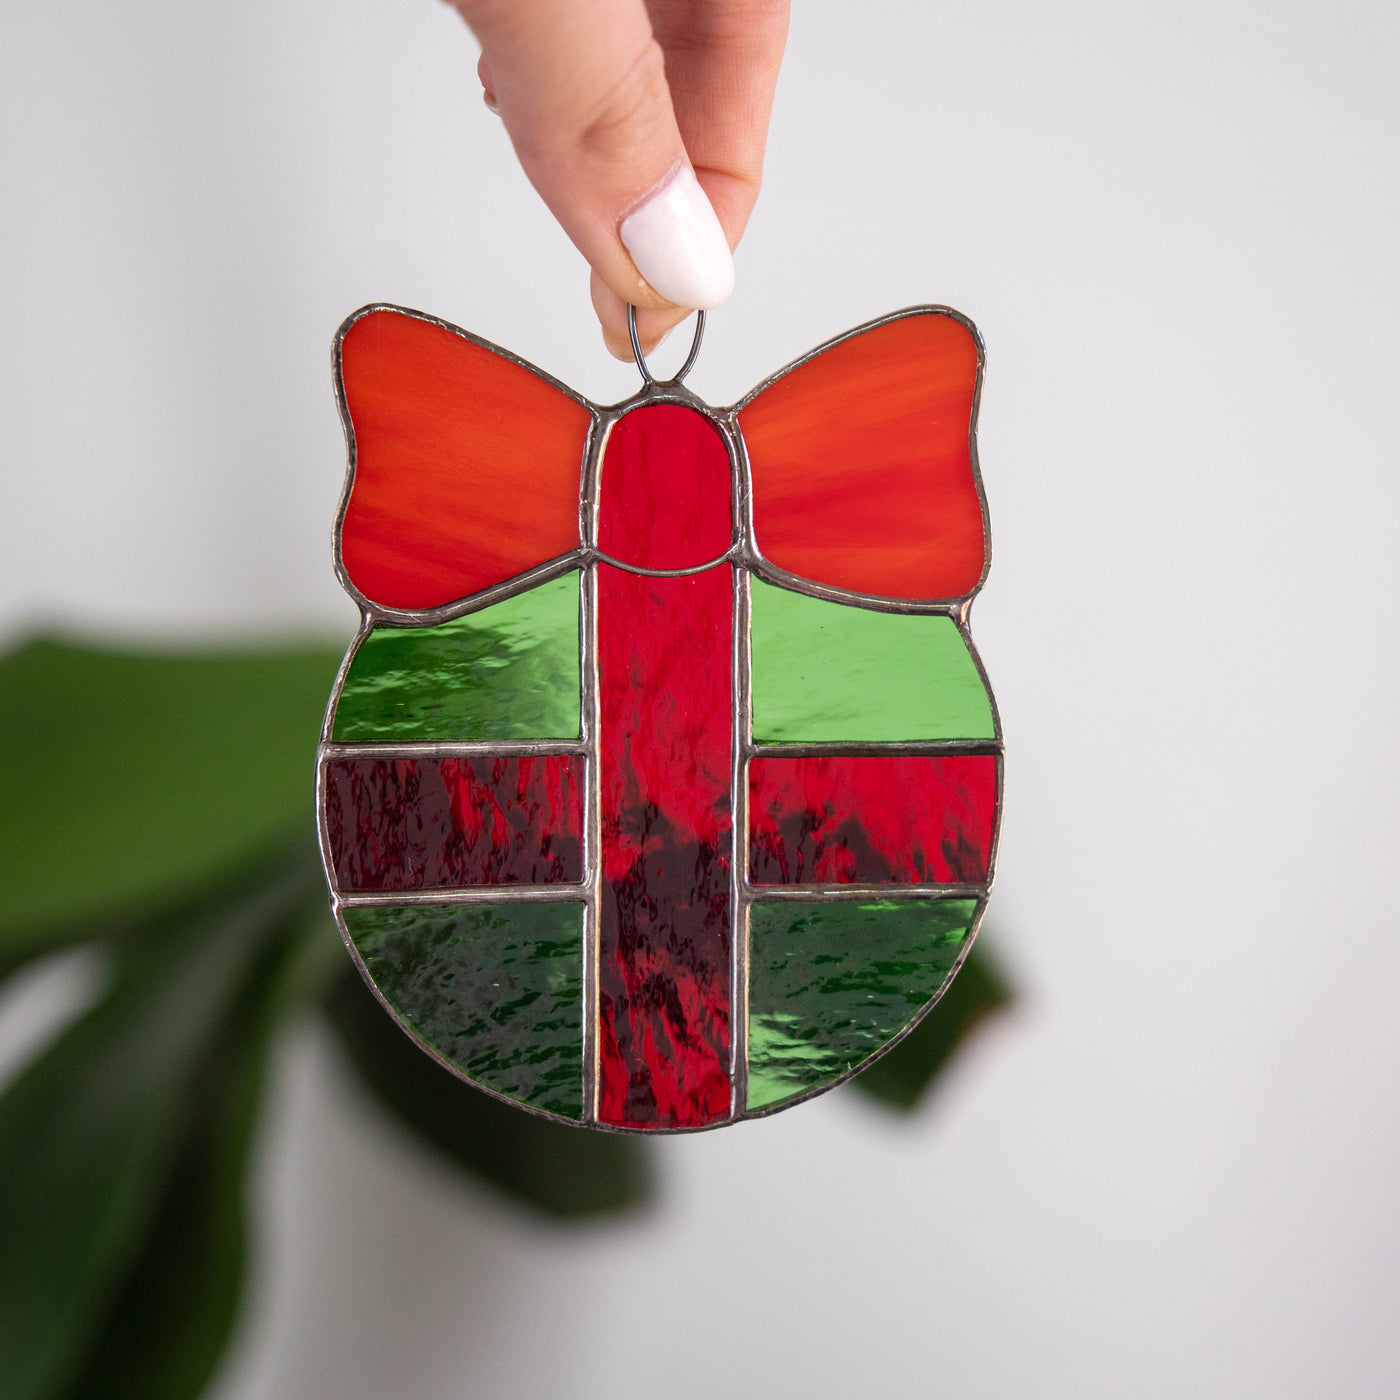 Stained glass round green gift with red bow window hanging 